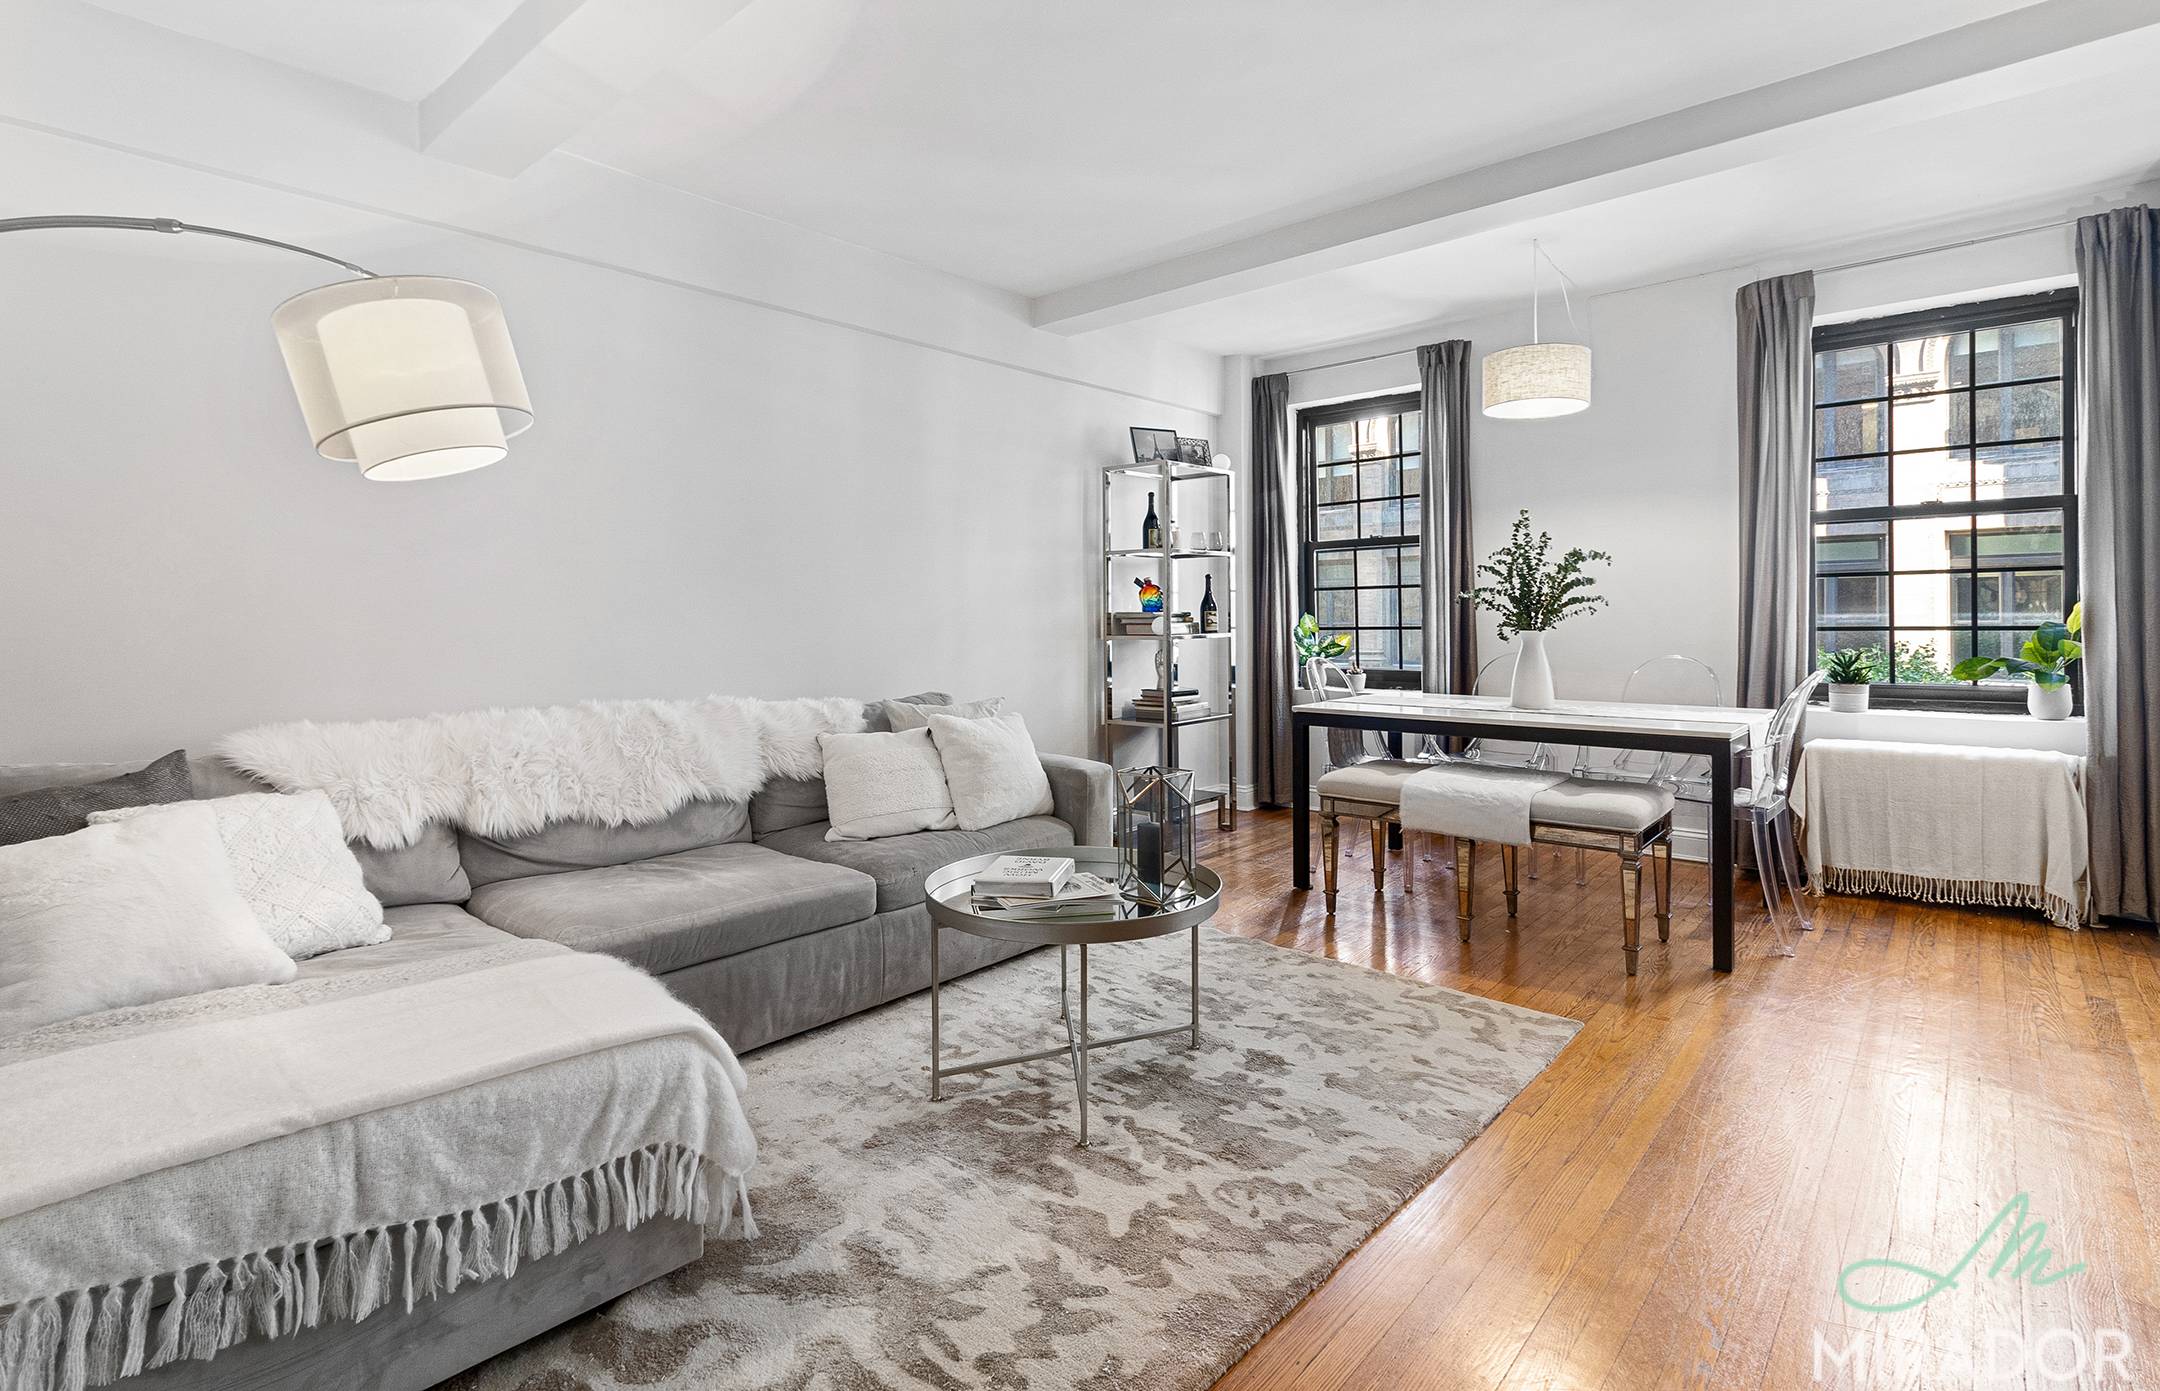 Pre war details marry modern upgrades in this spacious one bedroom, one bathroom apartment, with hardwood floors throughout, in one of Gramercy's prime pre war co ops, The Gramercy Arms.